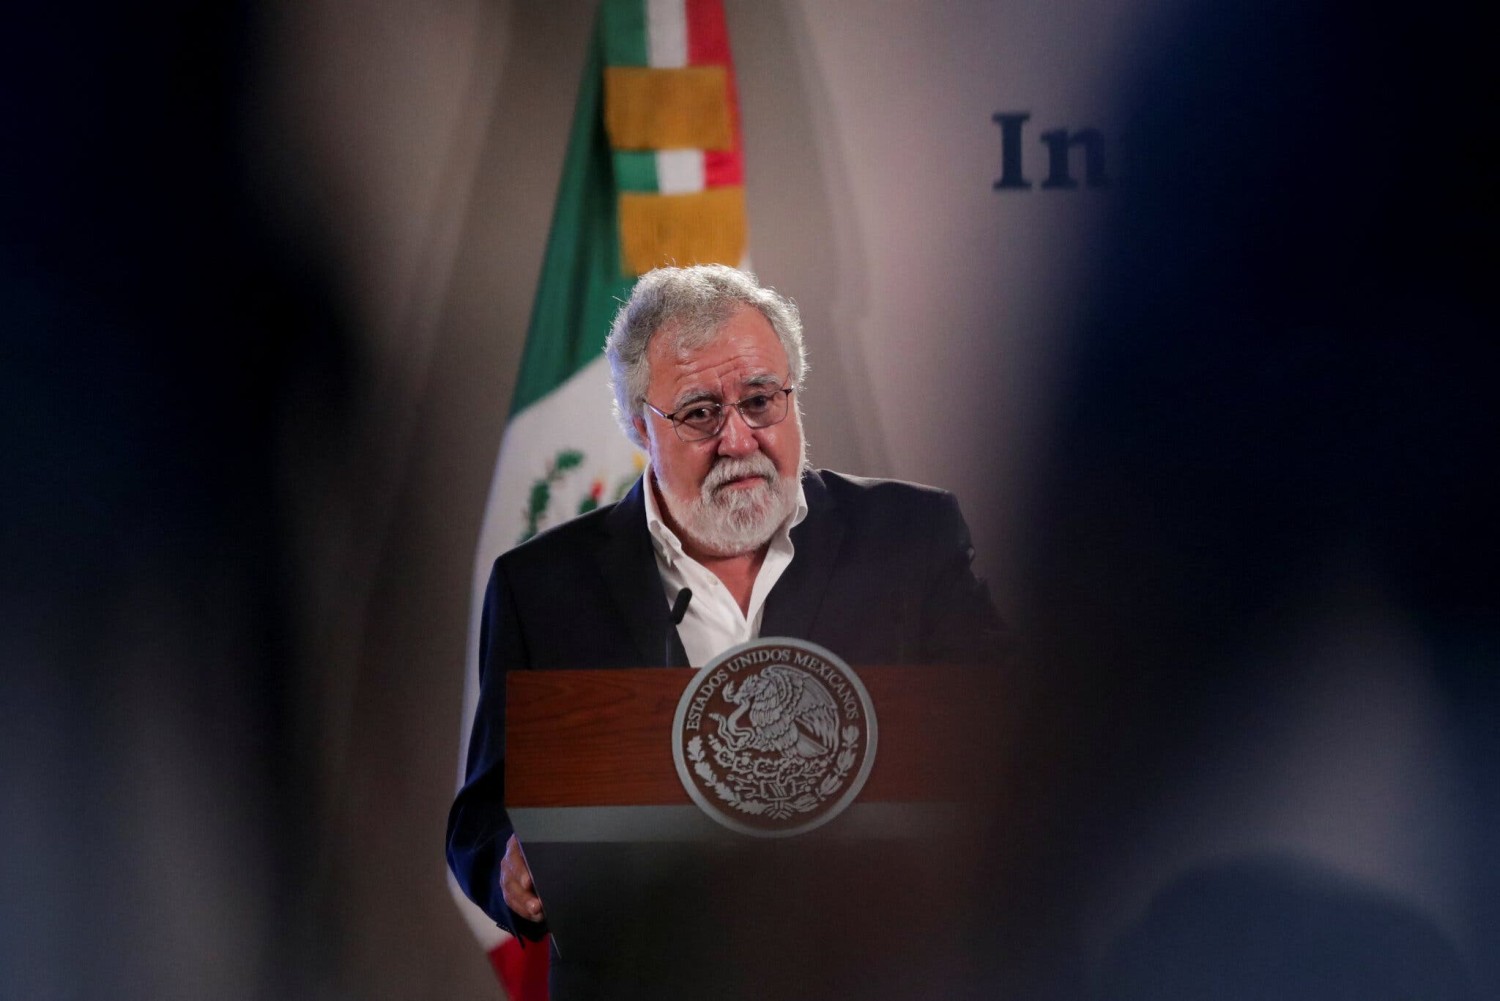 Alejandro Encinas, Mexico’s under secretary for human rights, speaking last year about the mass disappearance of 43 students.Credit...Henry Romero/Reuters